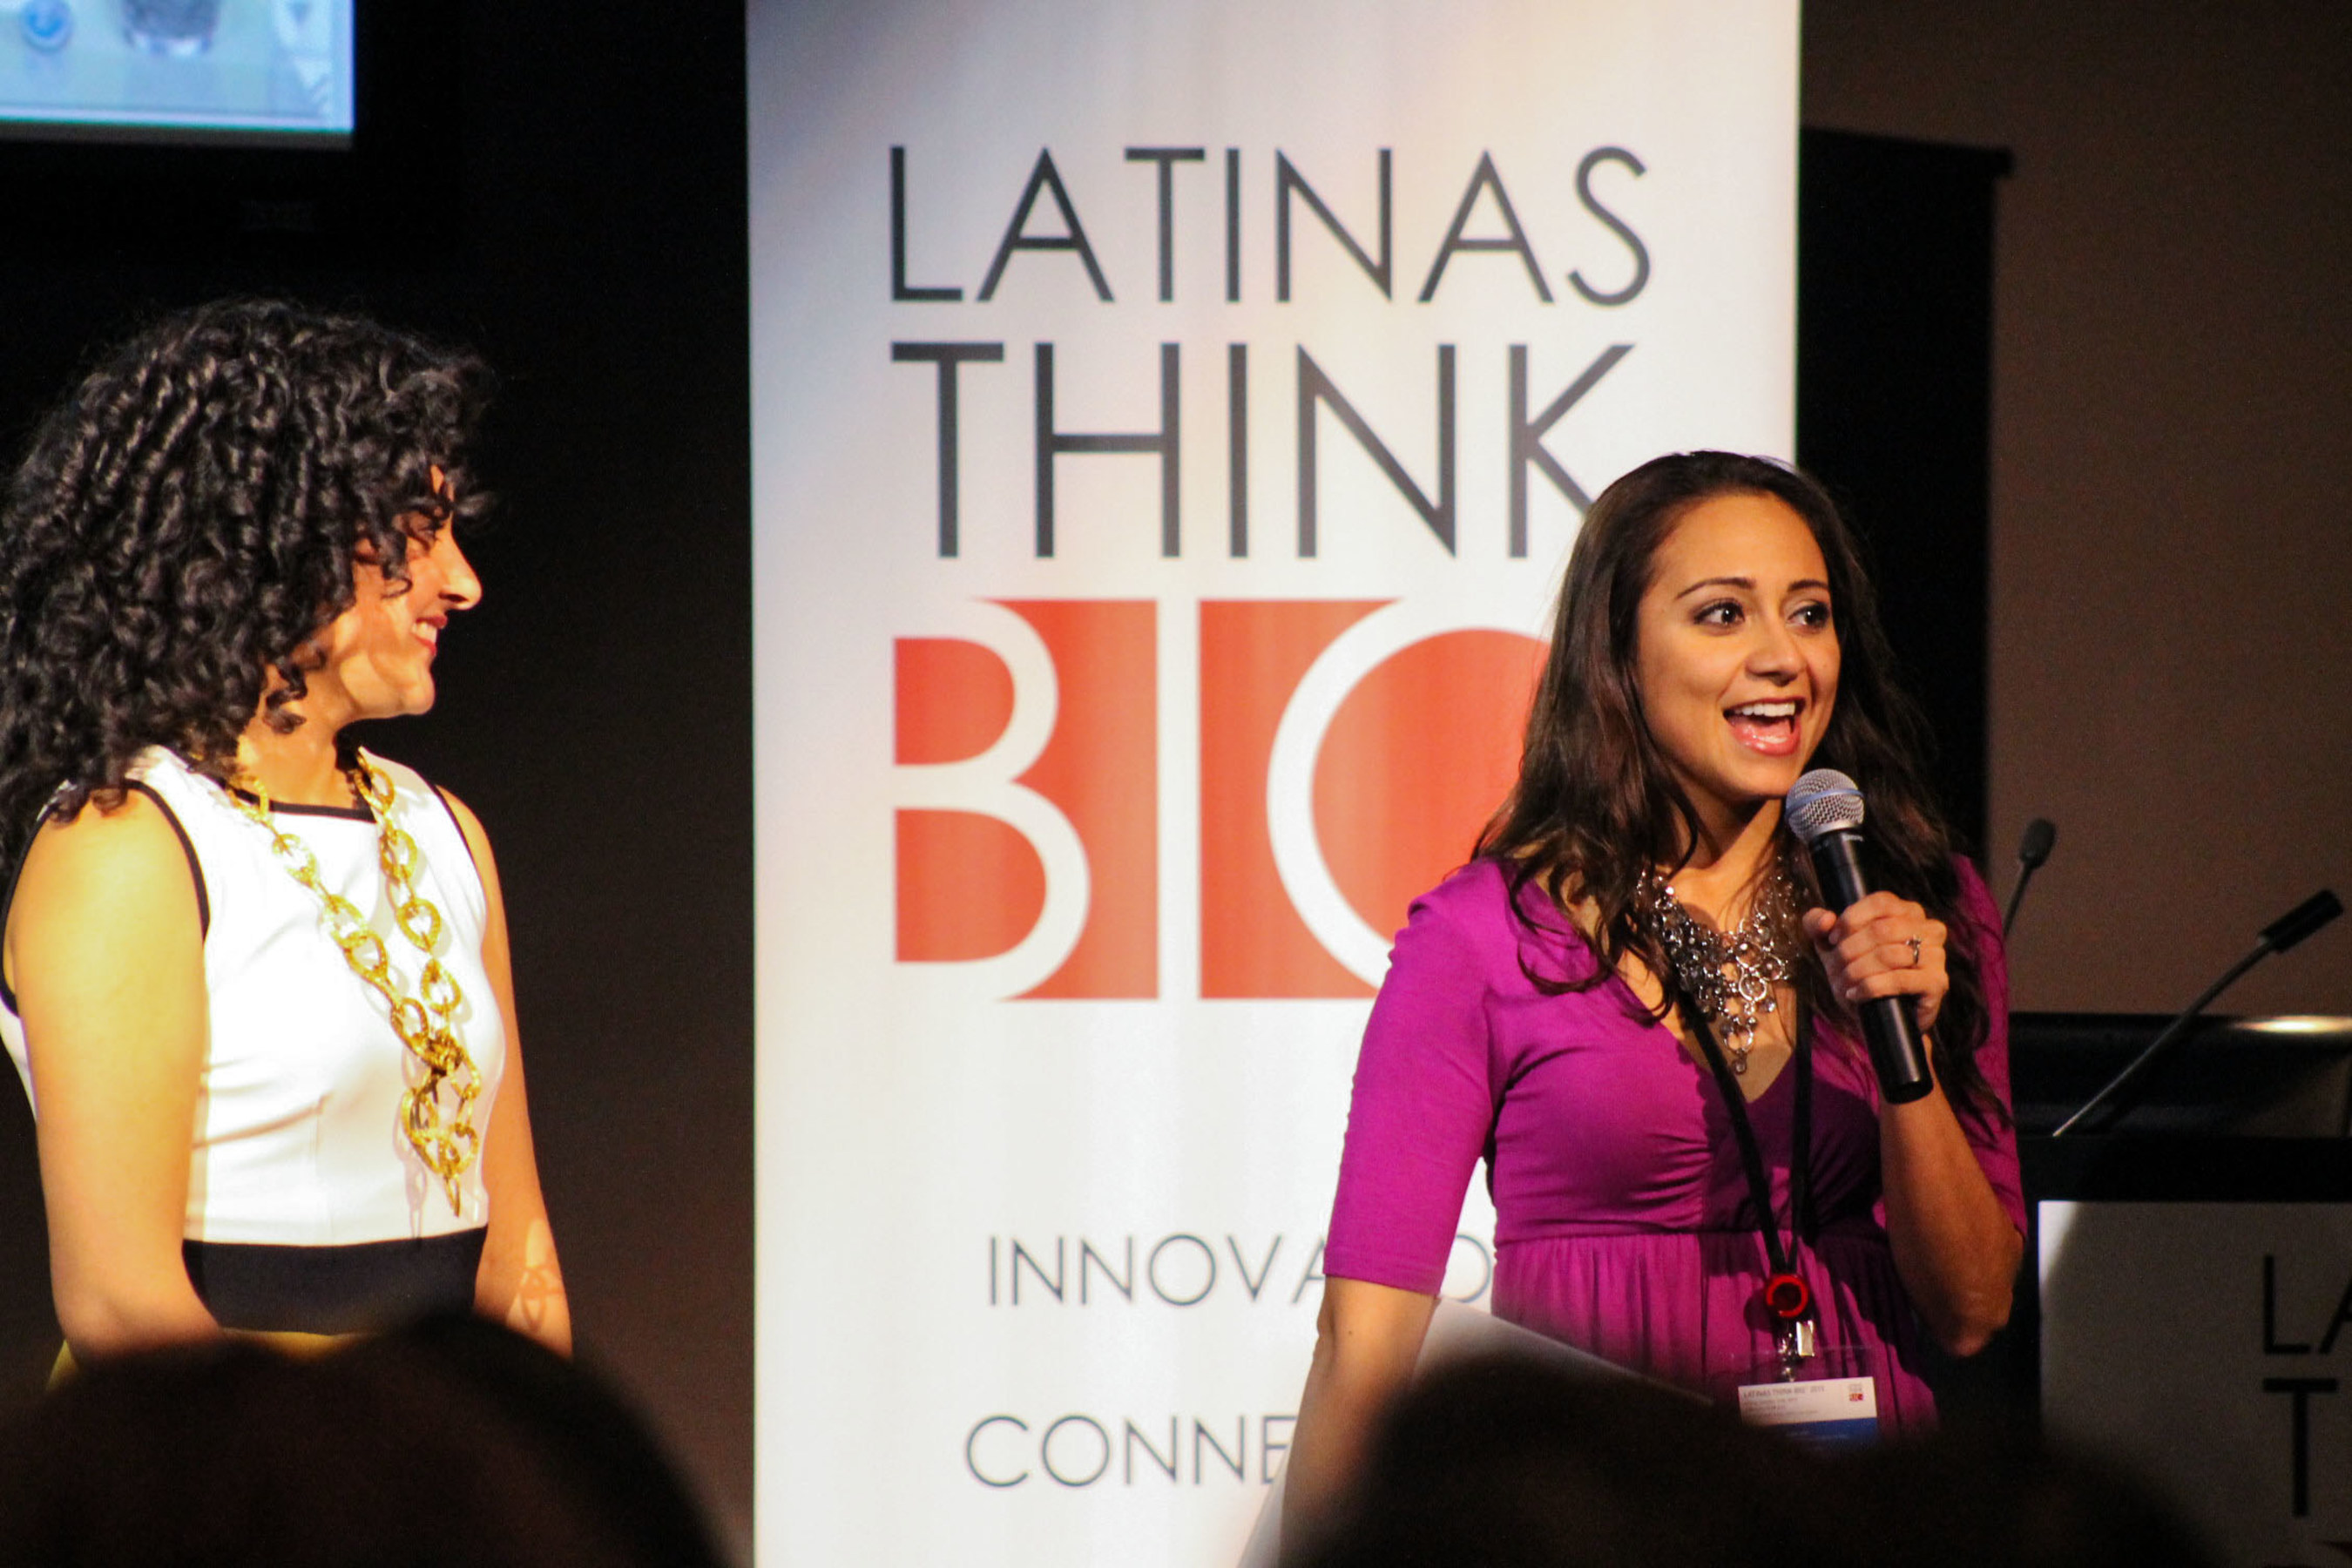 Latinas Think Big(R) Launches First Entrepreneurial Communities for Latinas to Boost Innovative Ideas, Careers and Businesses